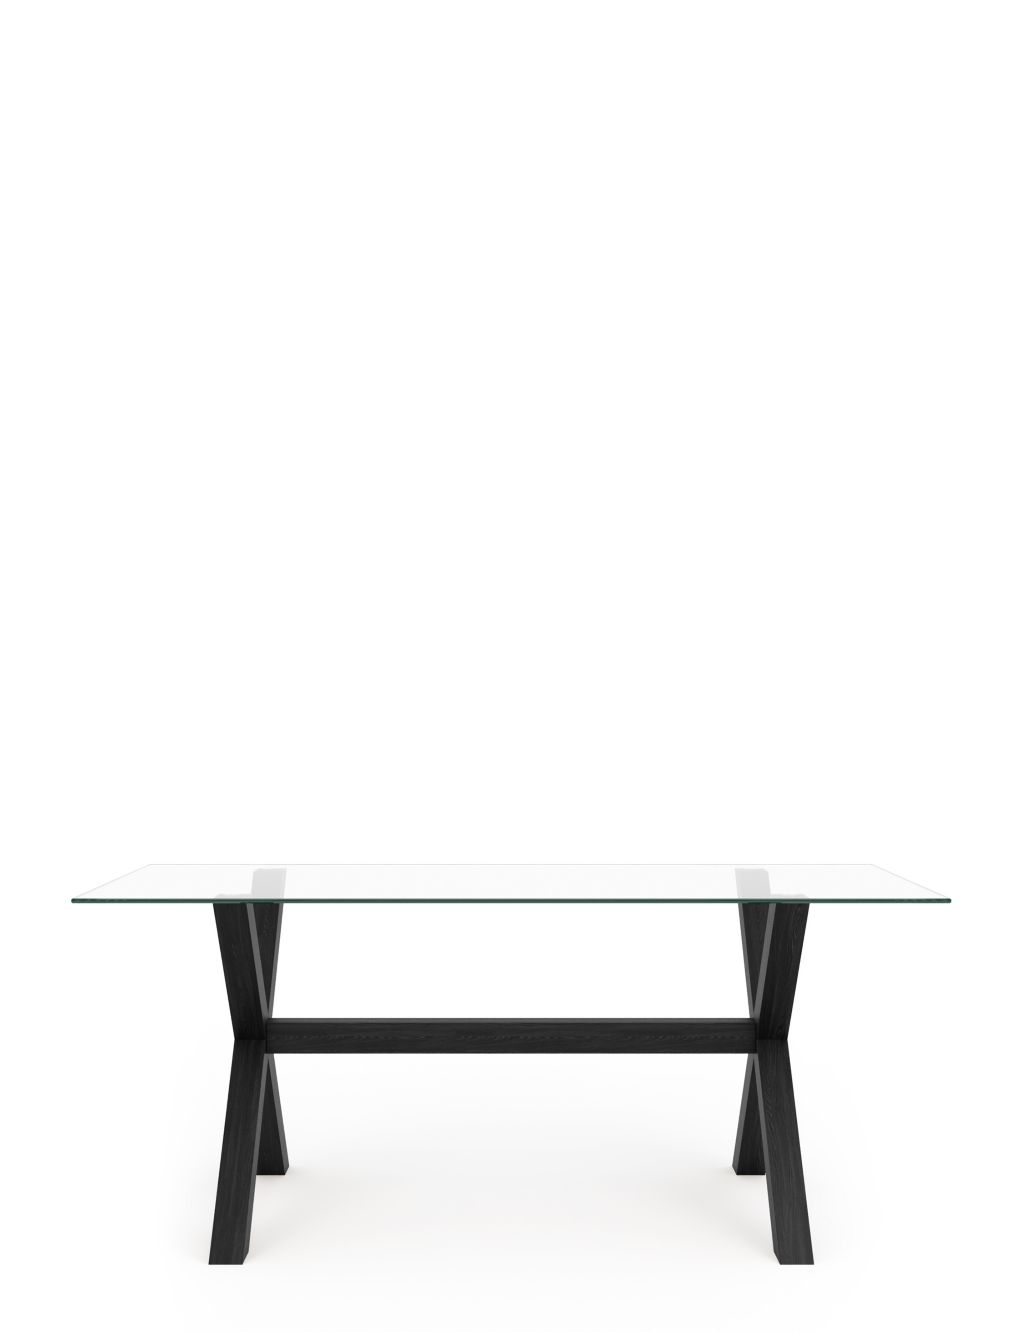 Colby 6 Seater Glass Dining Table image 2